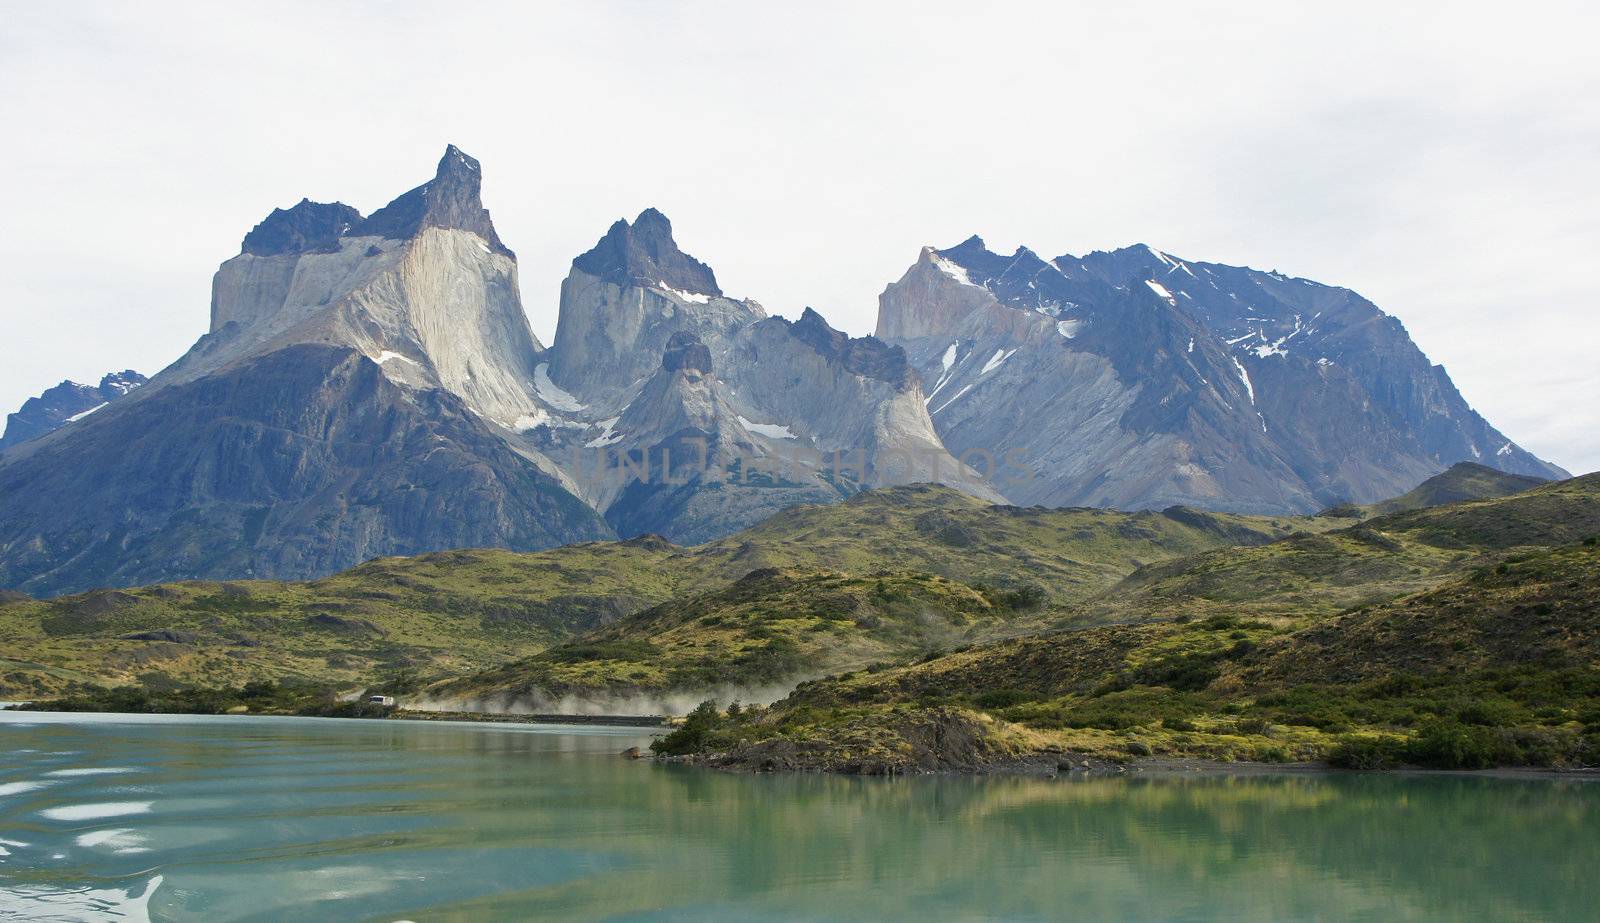 Landscape within the national park Torres del Paine, Patagonian Andes Mountains, Chile, South America